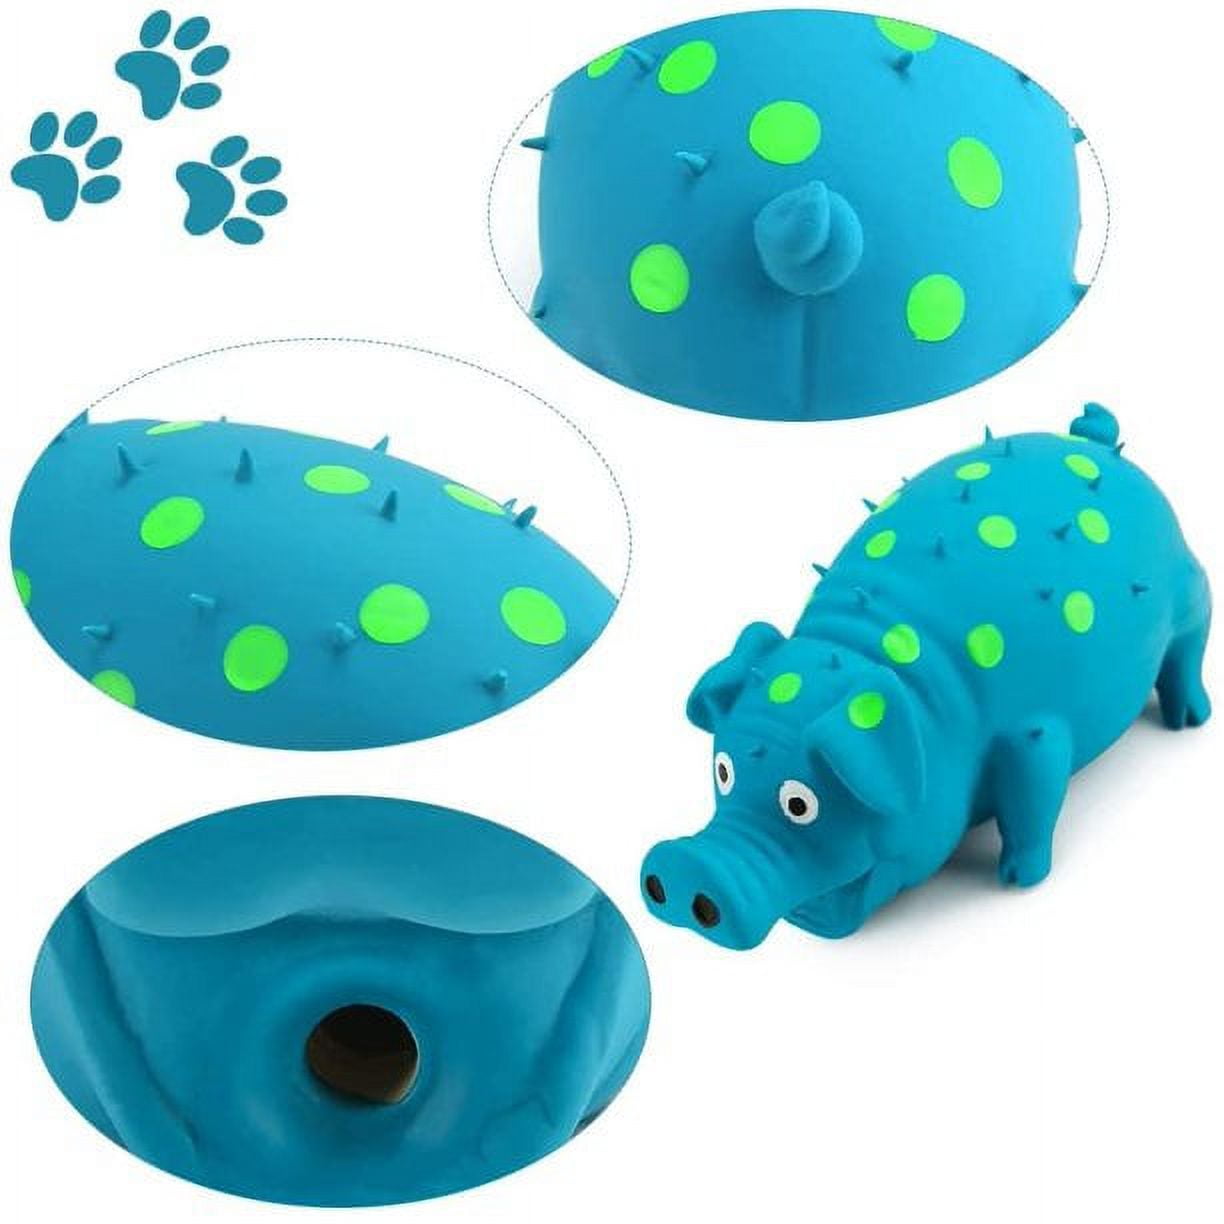 Noise-Relieving Dog Toy Frog Toy Intelligence Leakage Sniffing and